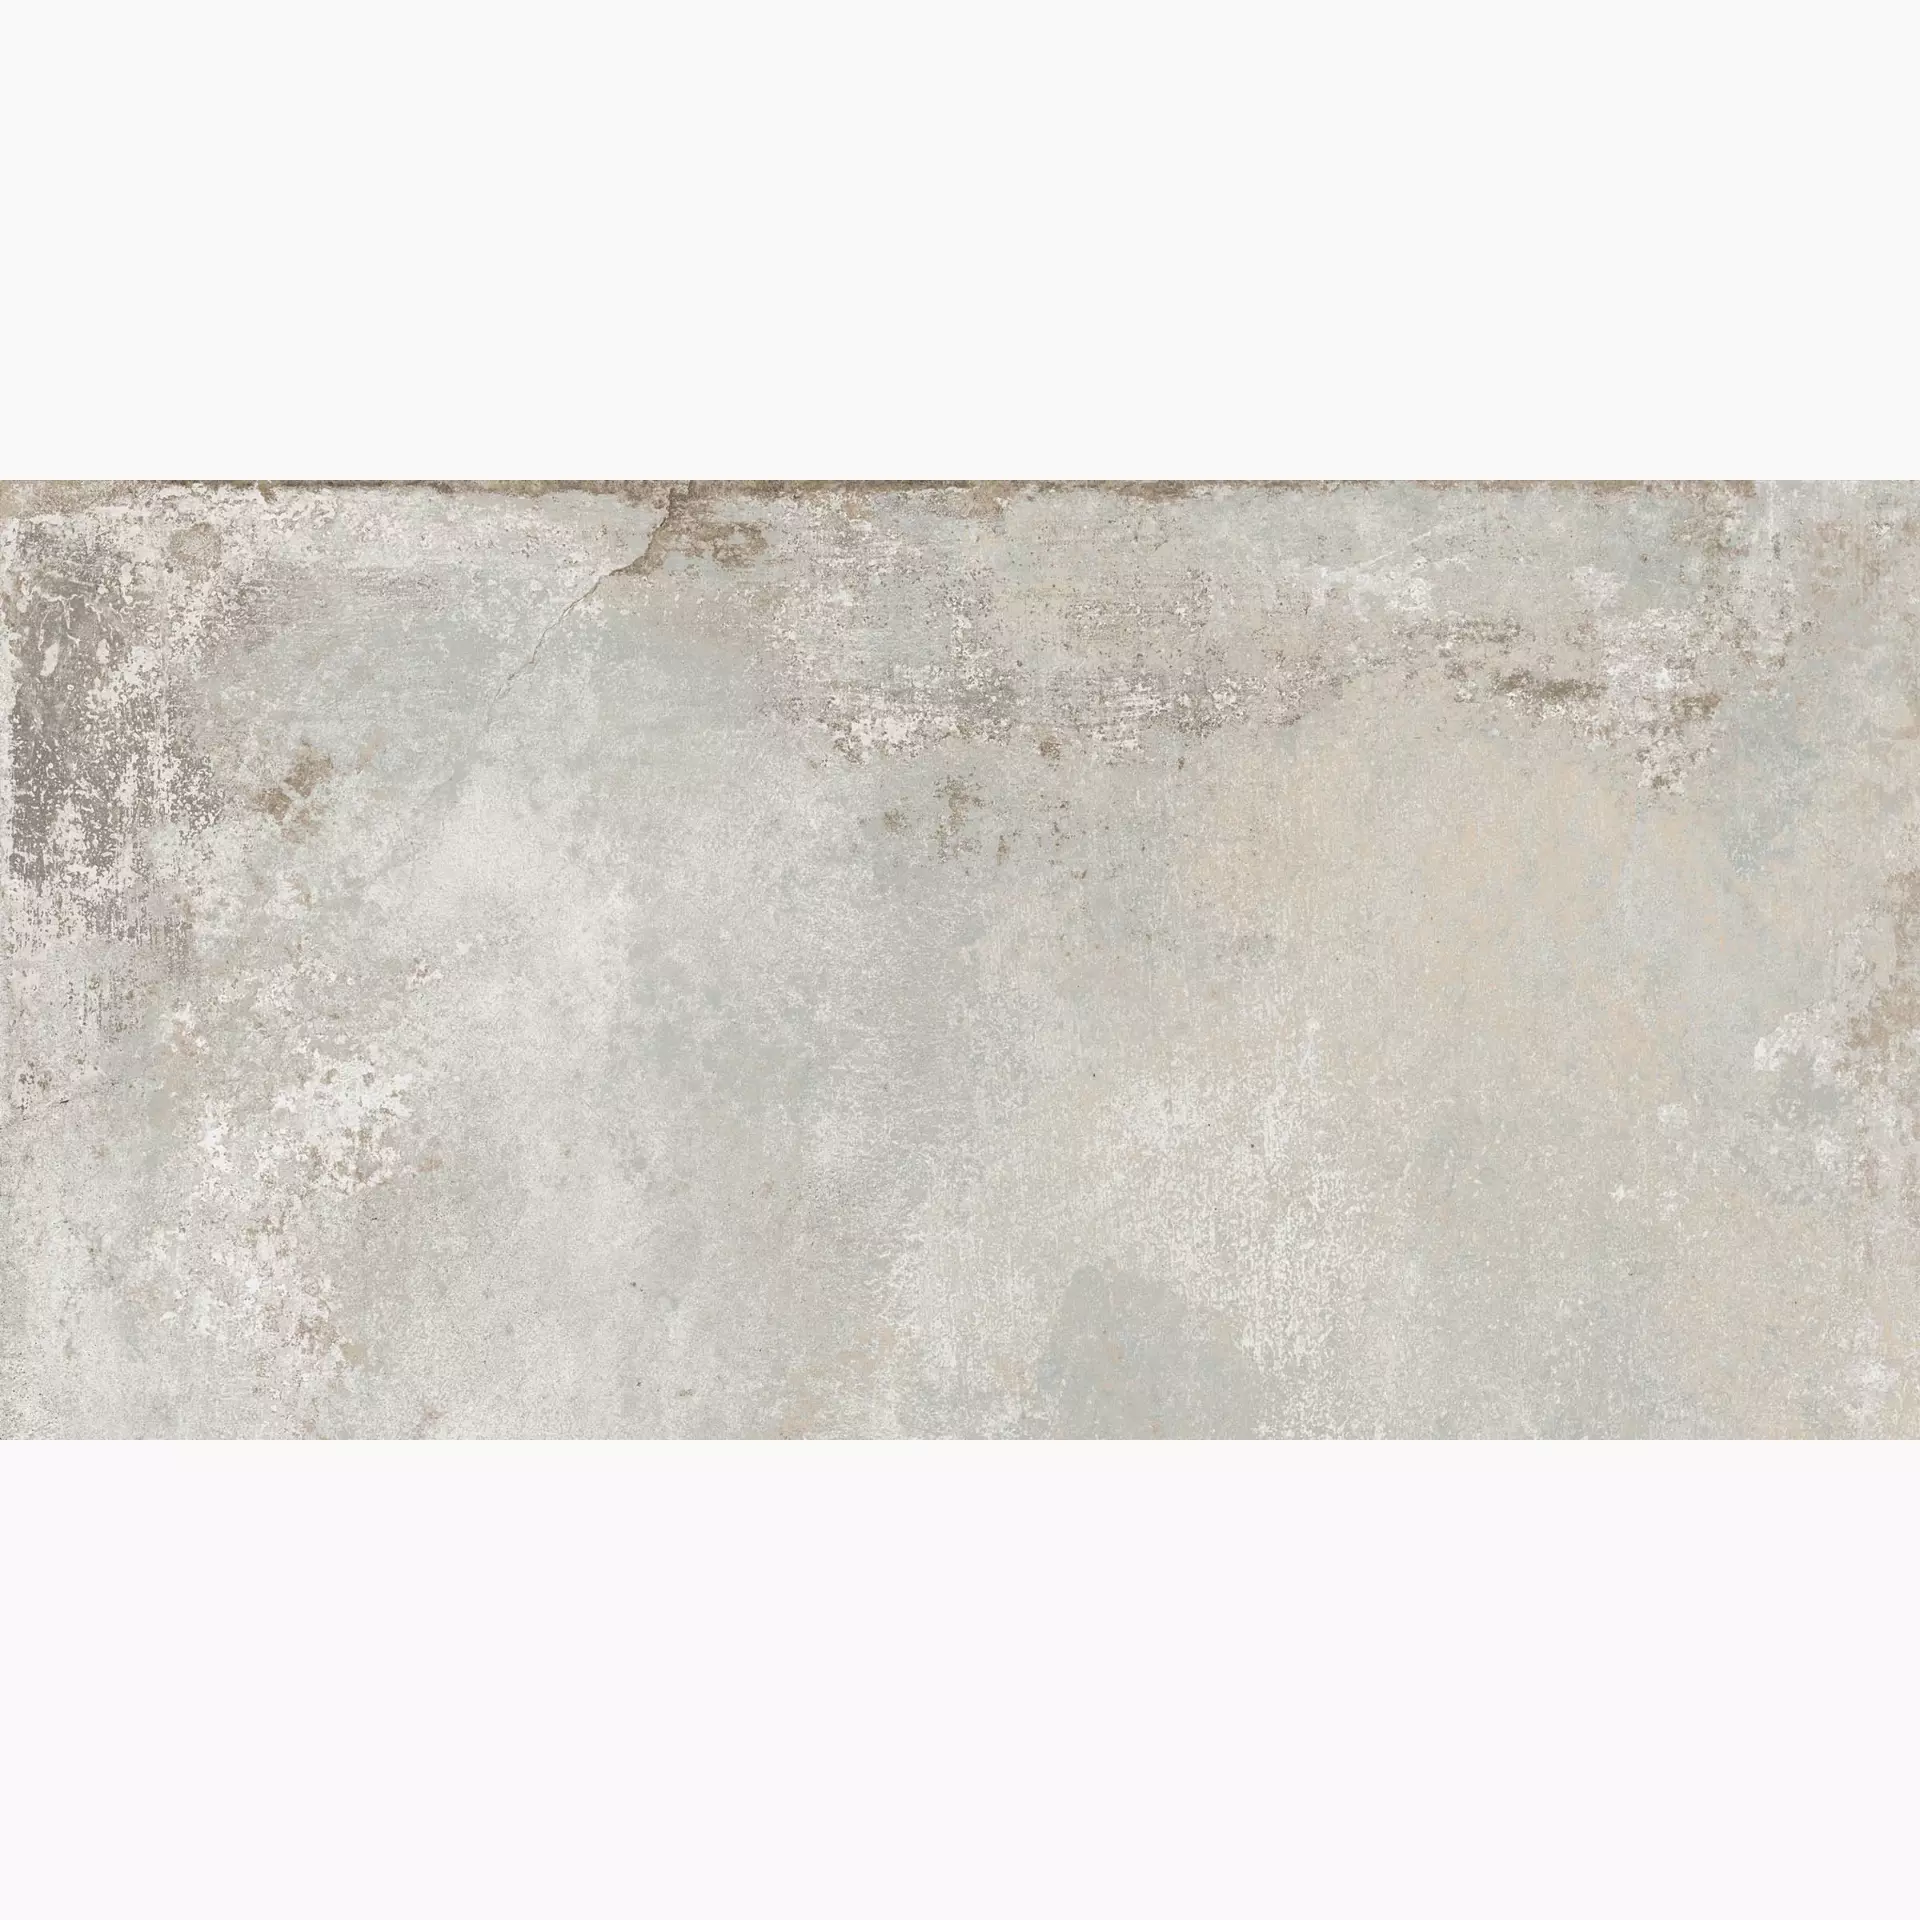 ABK Ghost Sage Naturale PF60004367 60x120cm rectified 8,5mm